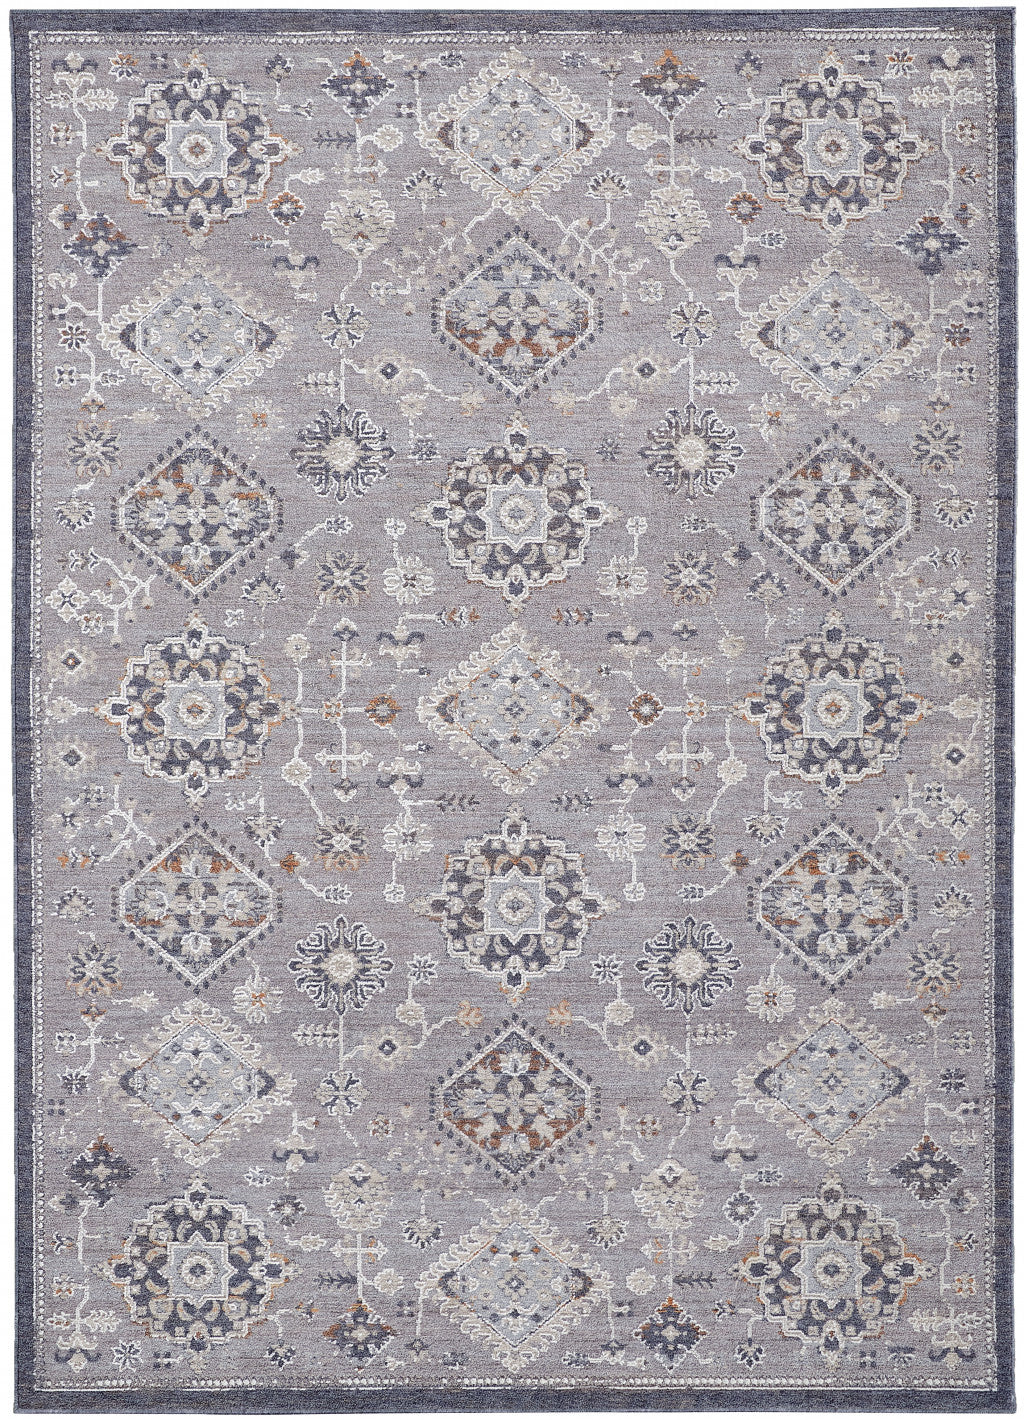 4' X 6' Gray Floral Power Loom Stain Resistant Area Rug